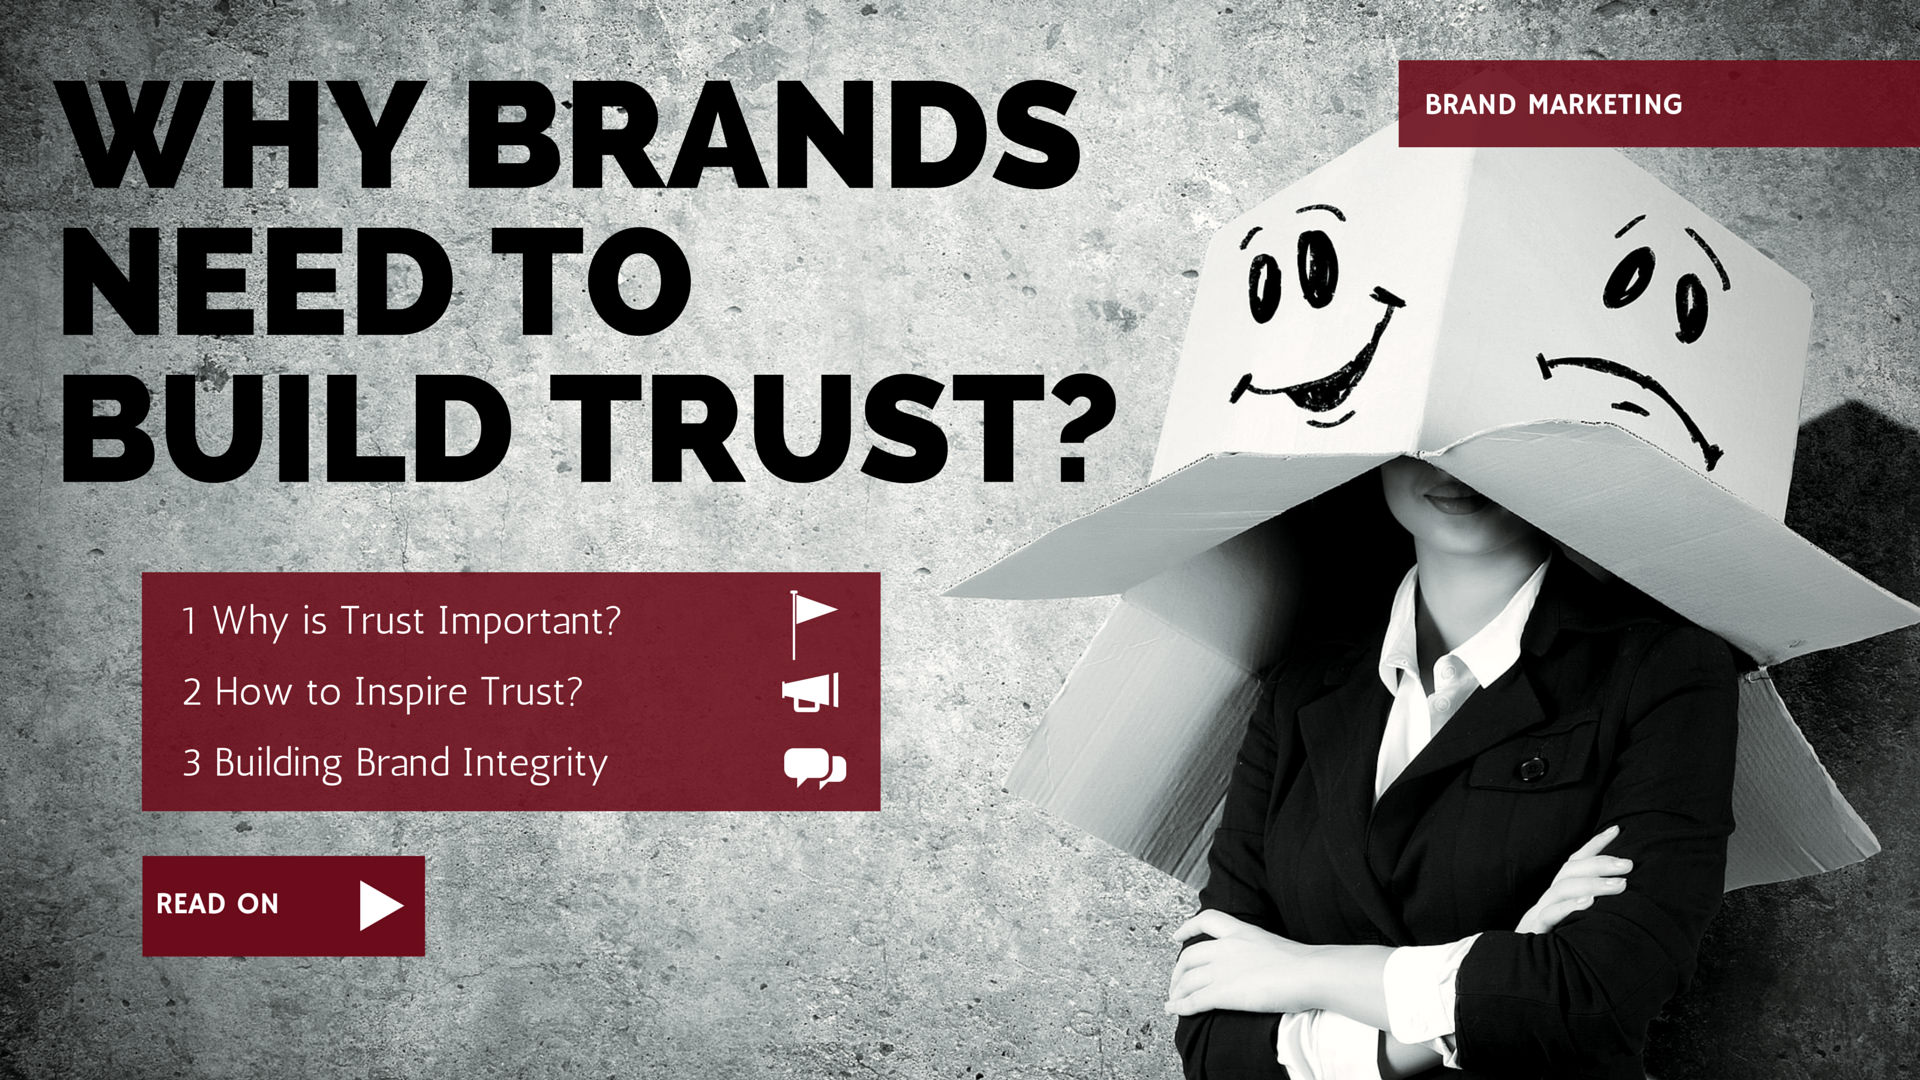 Why Brands Need to Build Trust?